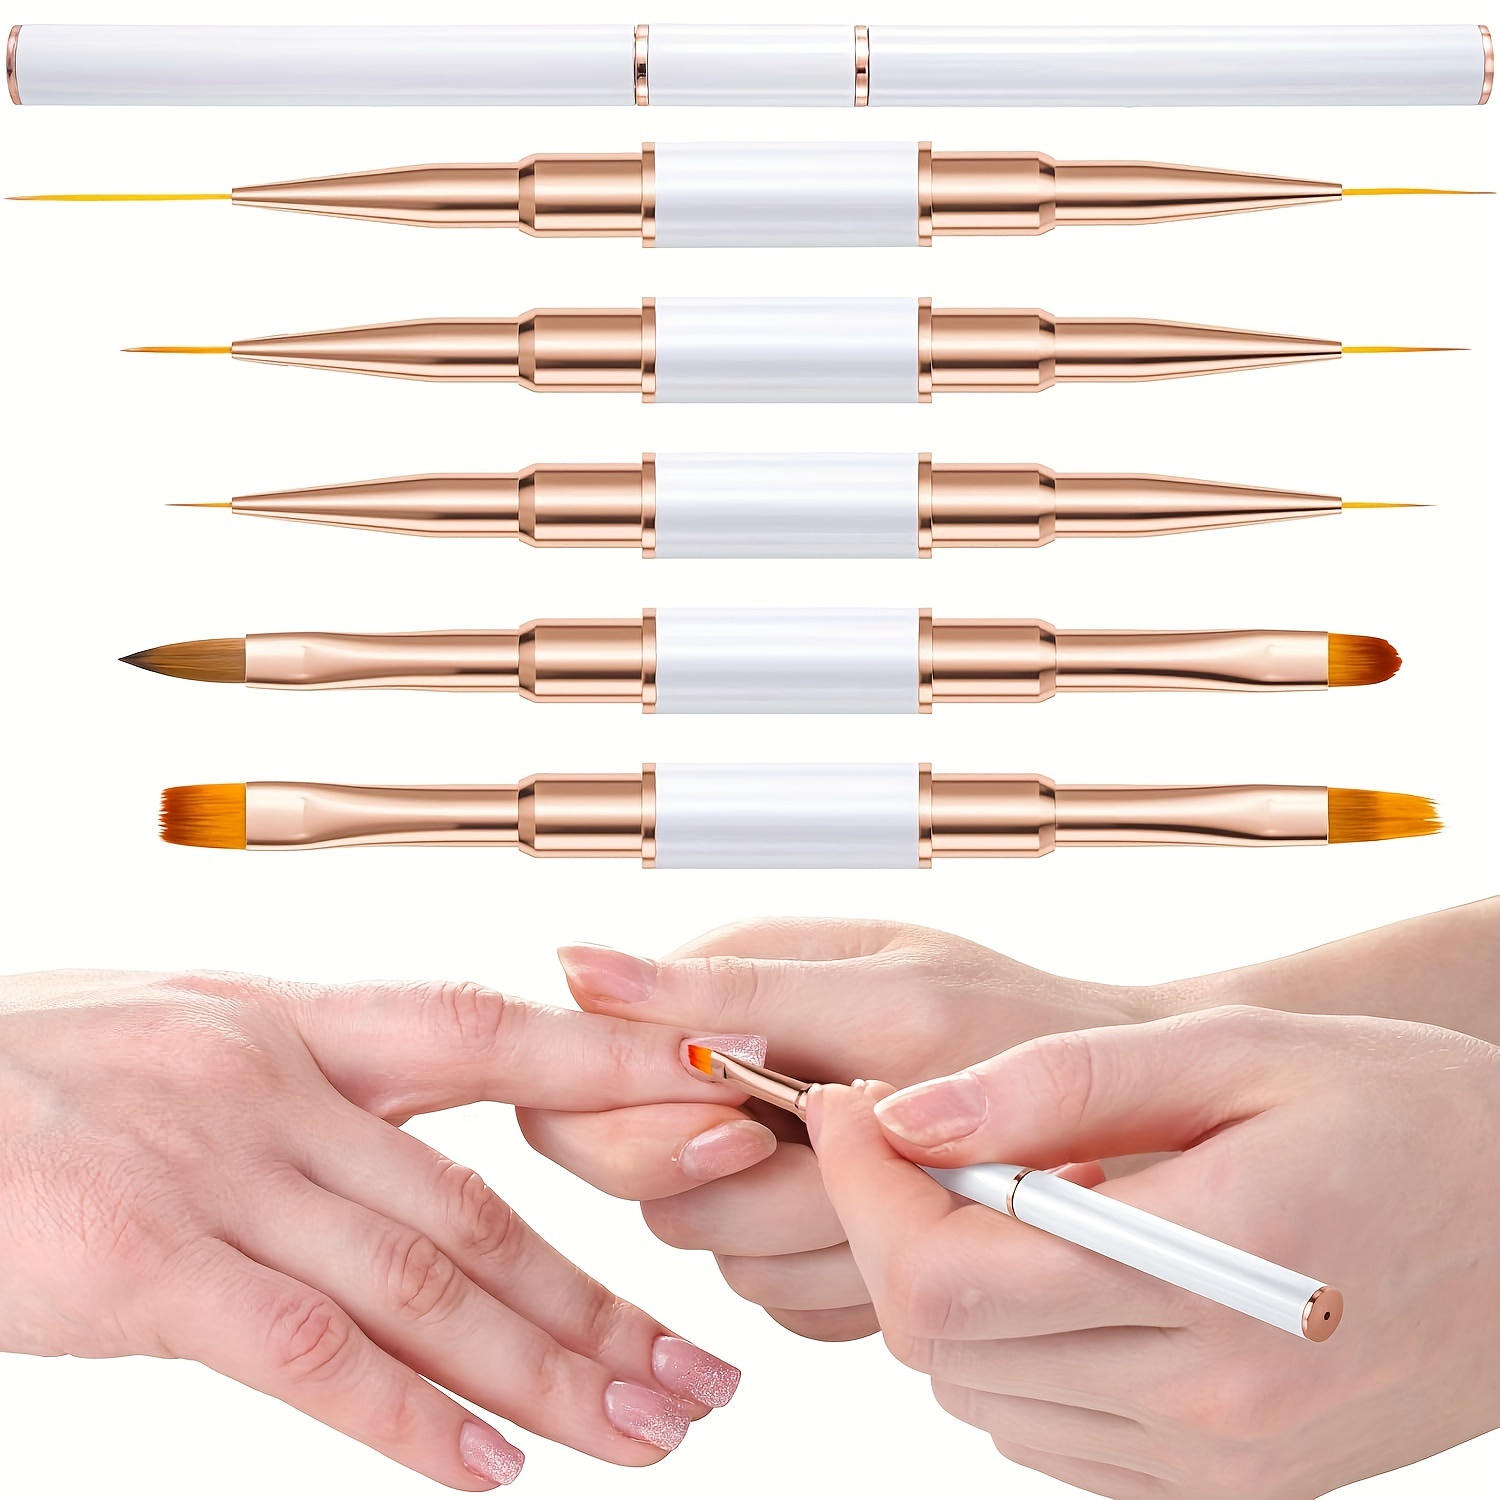 

5-piece Dual-ended Nail Art Brush Set - Metal Handle, Gel & Polish Application, Cleaning Tools For Diy Manicure Designs (white)